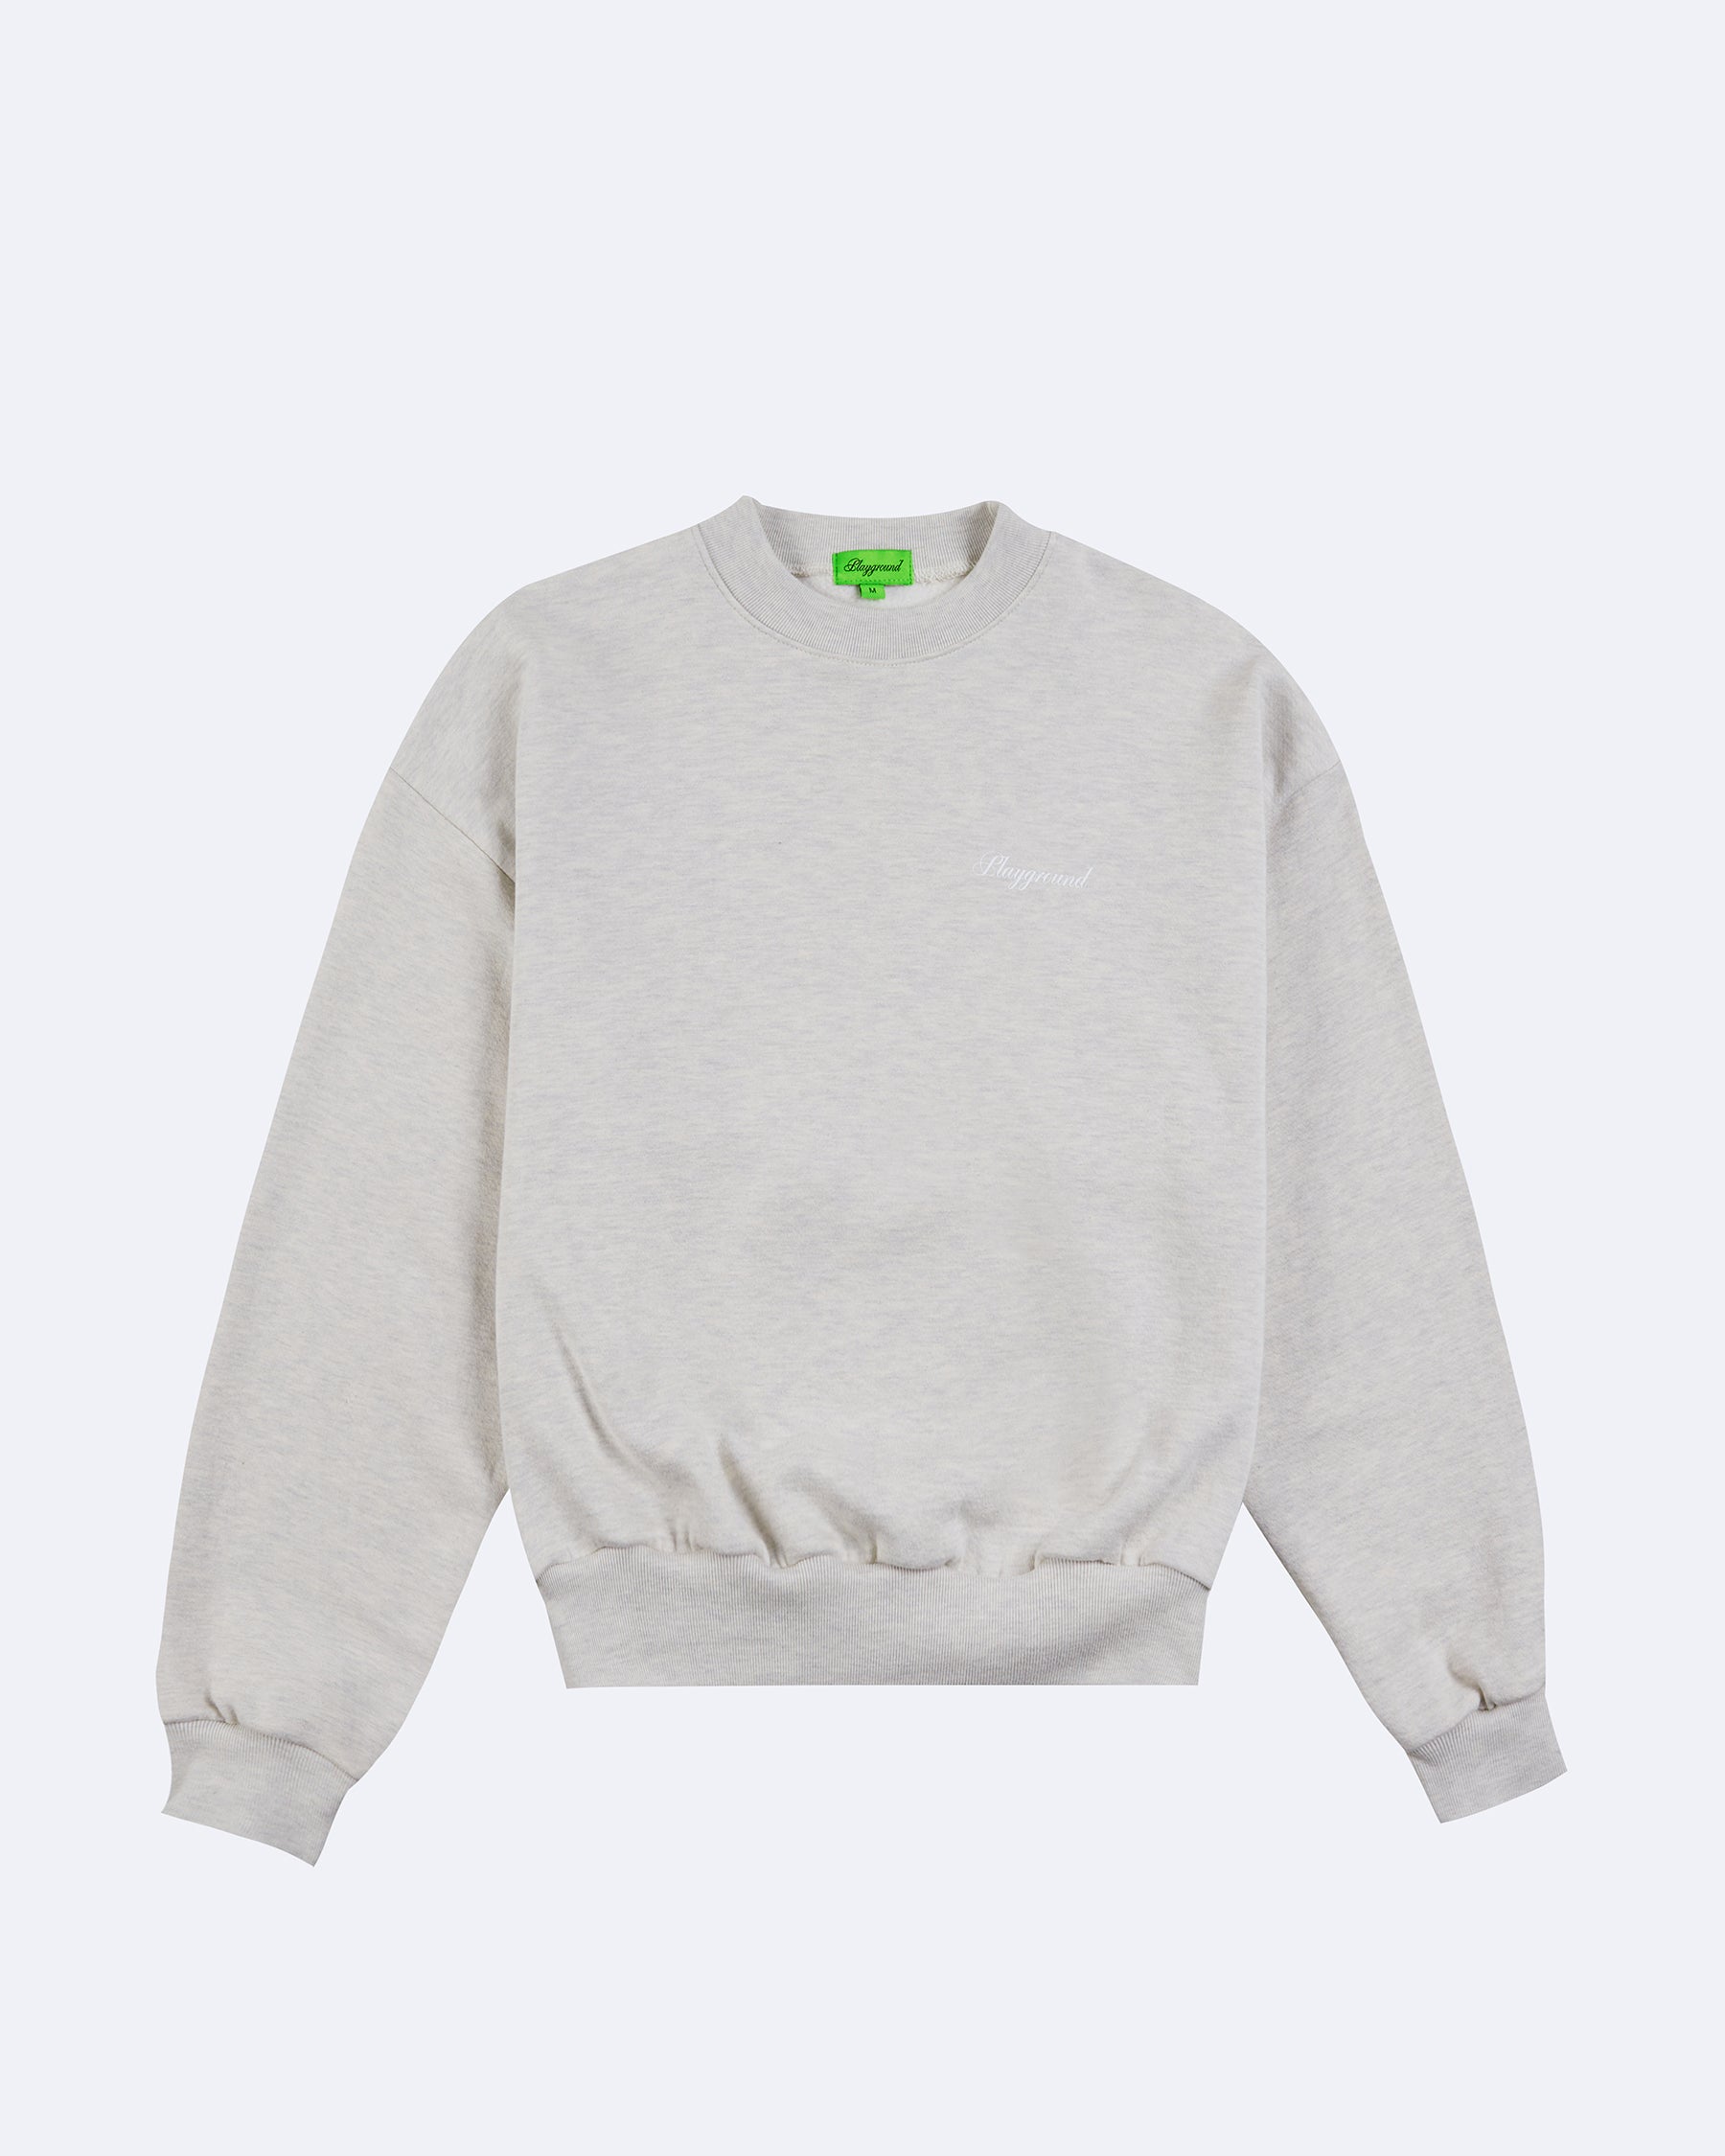 Ash Psk Collective Easy Sweatshirt Green 2X NWT Crew Neck Fit - $45 New  With Tags - From Julia